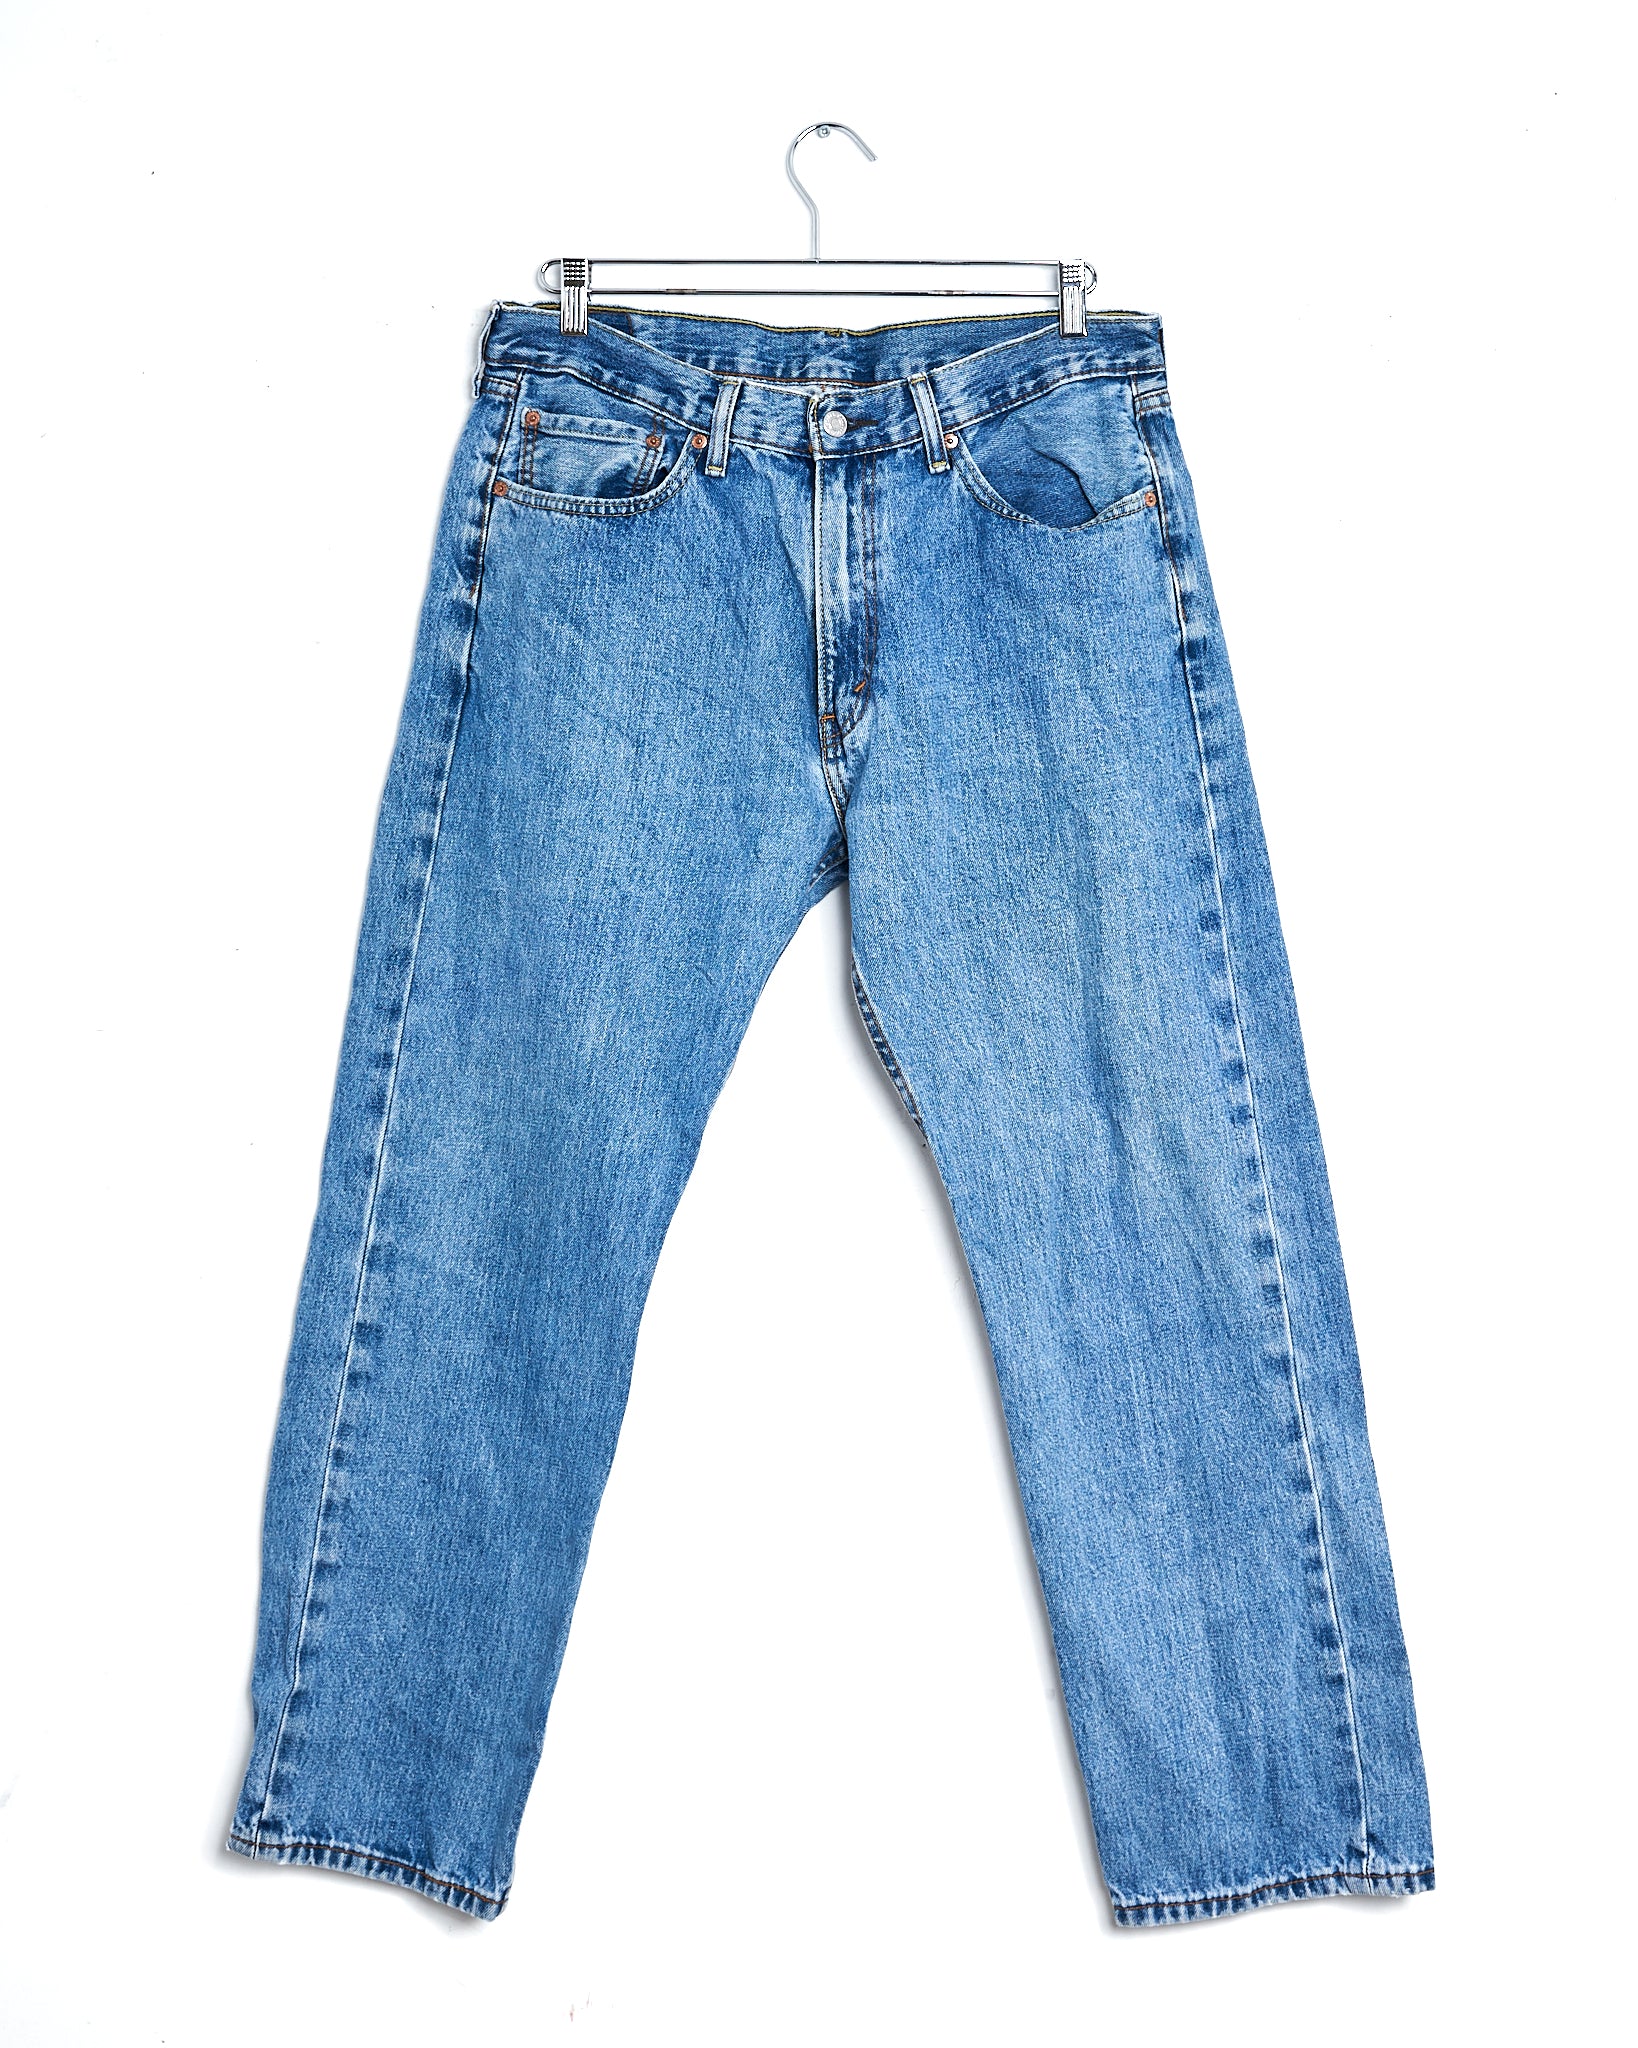 Levi's 505 - 34x29 – Coffee and Clothing